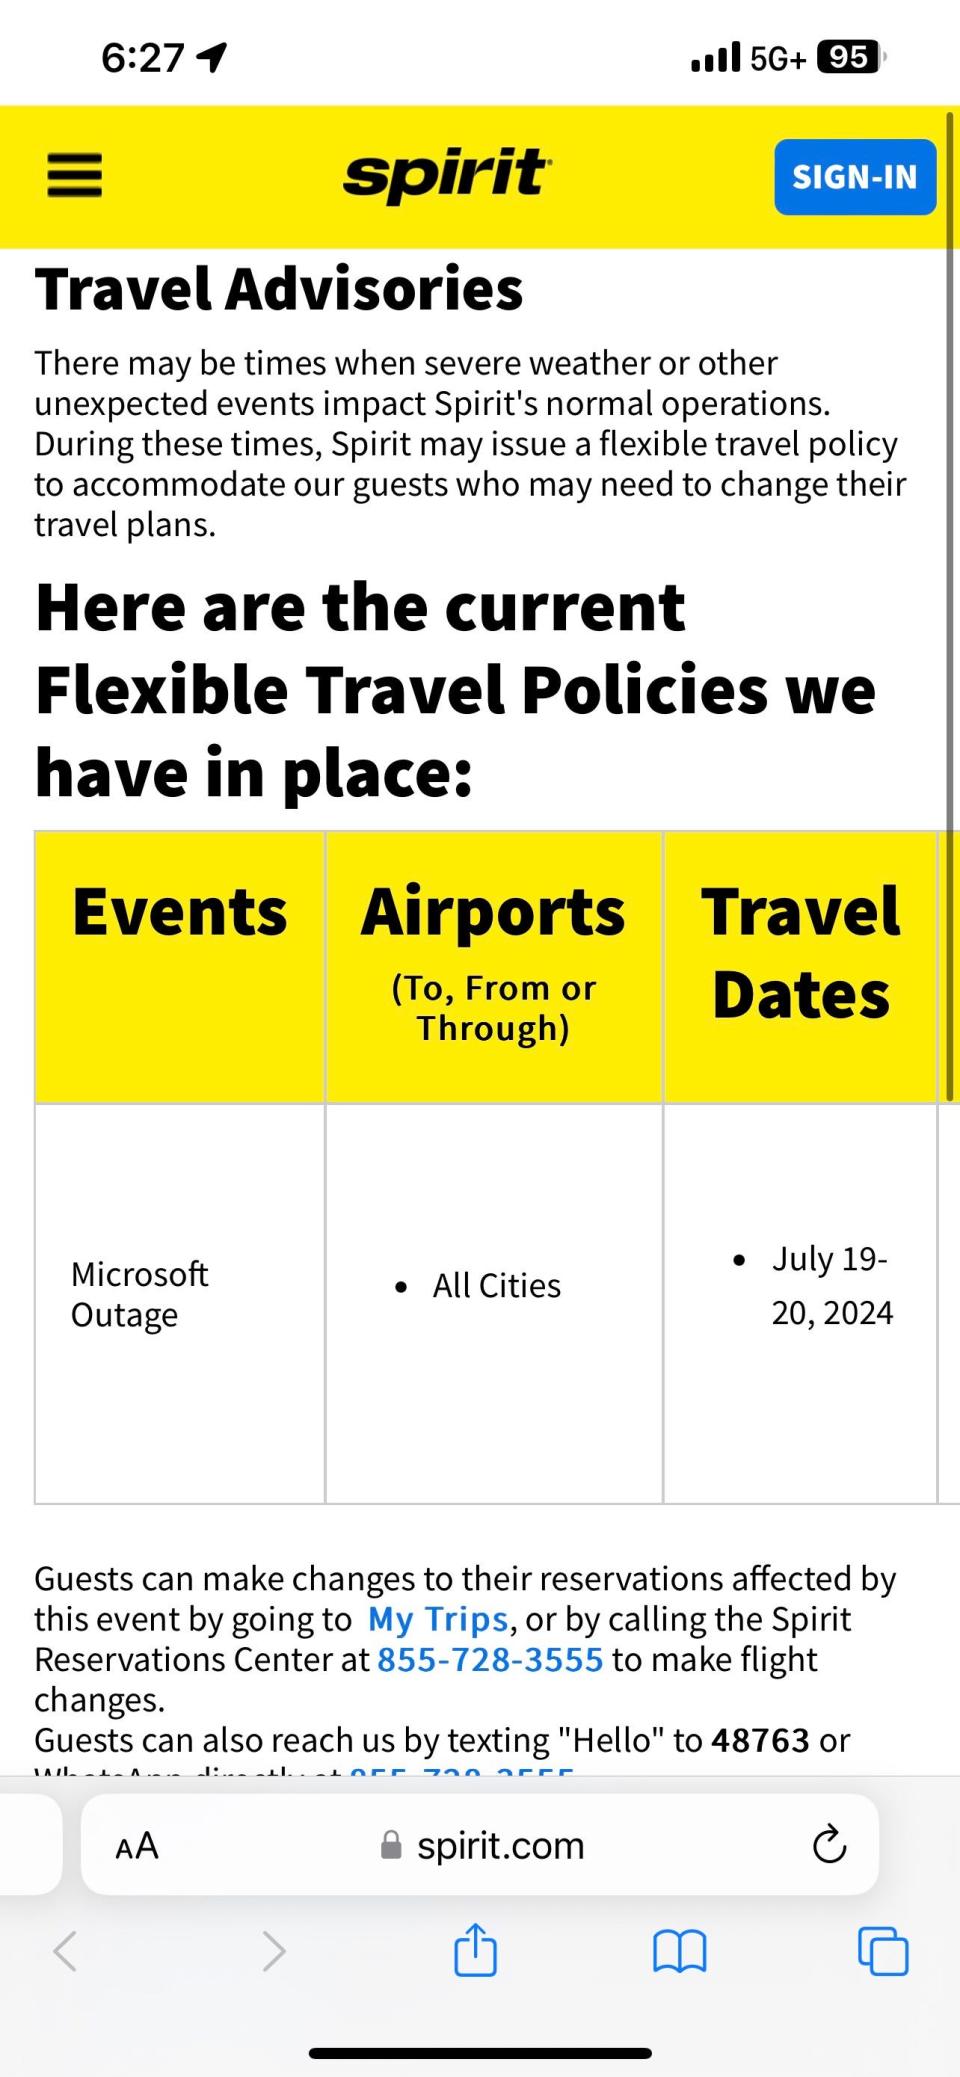 Spirit Airlines implements flexible travel policy during Microsoft outage July 19, 2024.